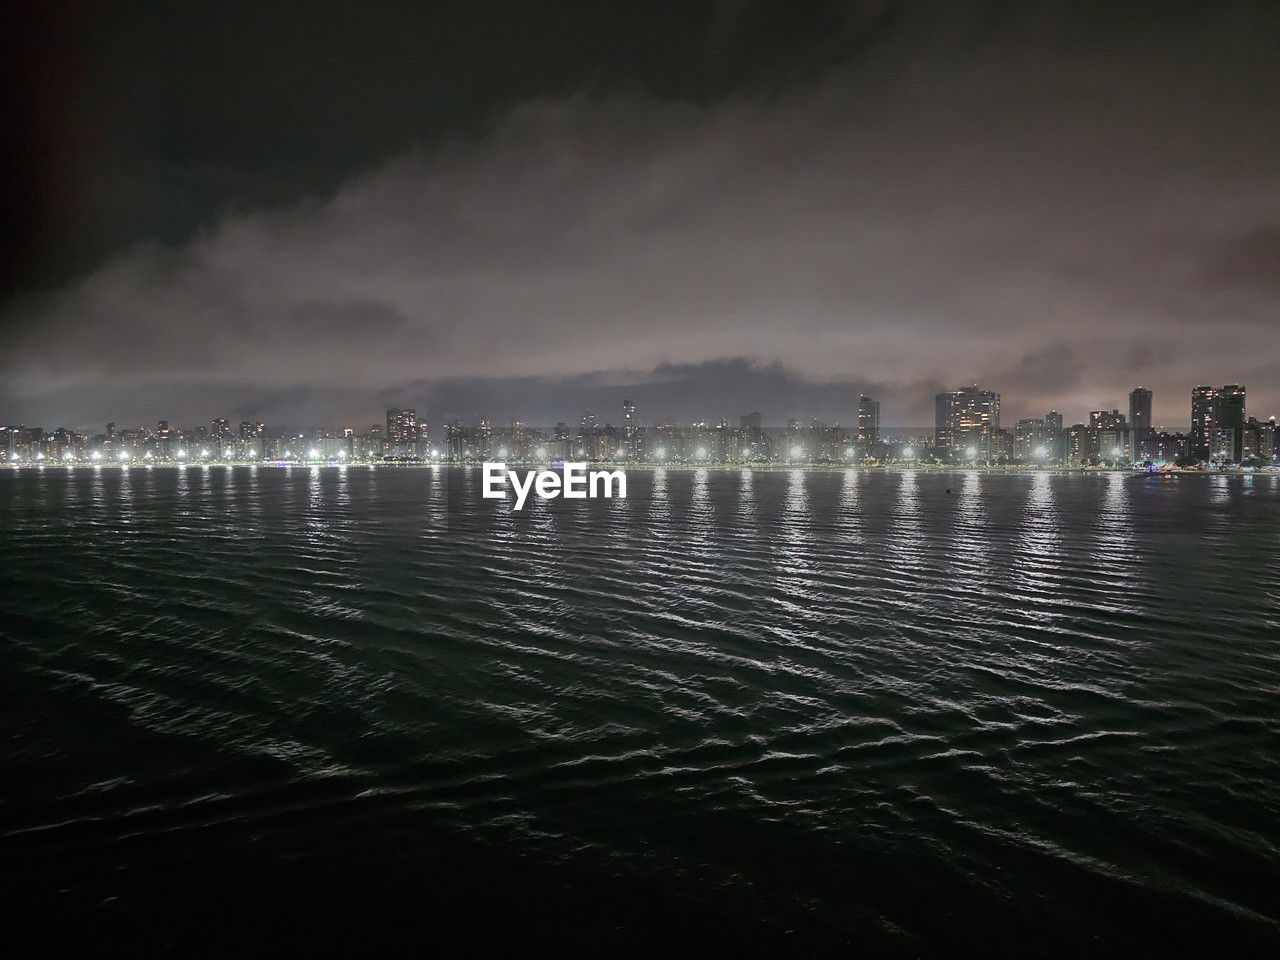 water, night, sky, architecture, building exterior, city, reflection, built structure, nature, cloud, illuminated, sea, darkness, light, no people, horizon, beauty in nature, cityscape, dusk, building, outdoors, environment, landscape, travel destinations, scenics - nature, wave, land, waterfront, motion, storm, evening, skyscraper